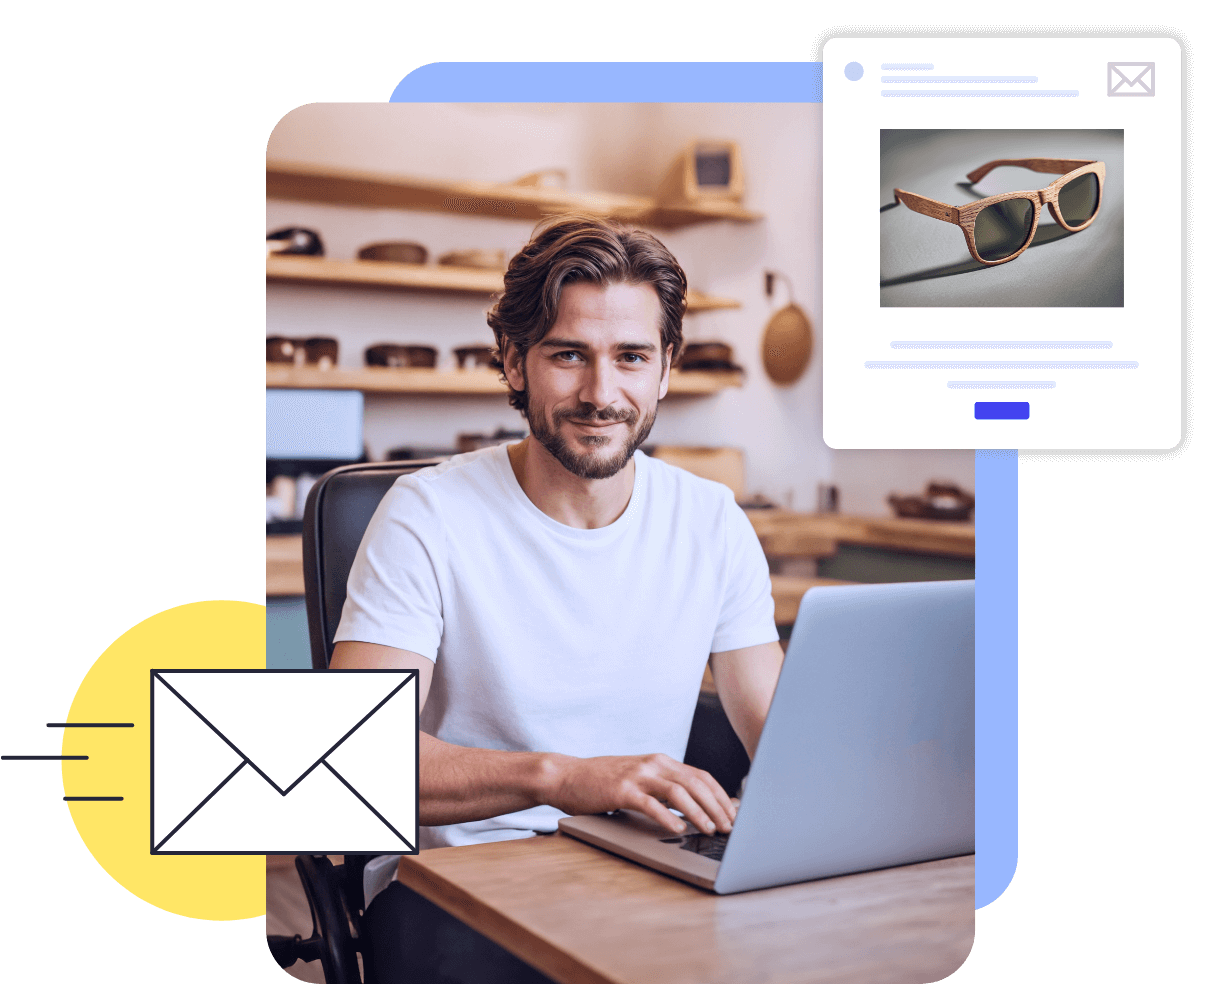 Easy Email Marketing Built to Grow Your Business